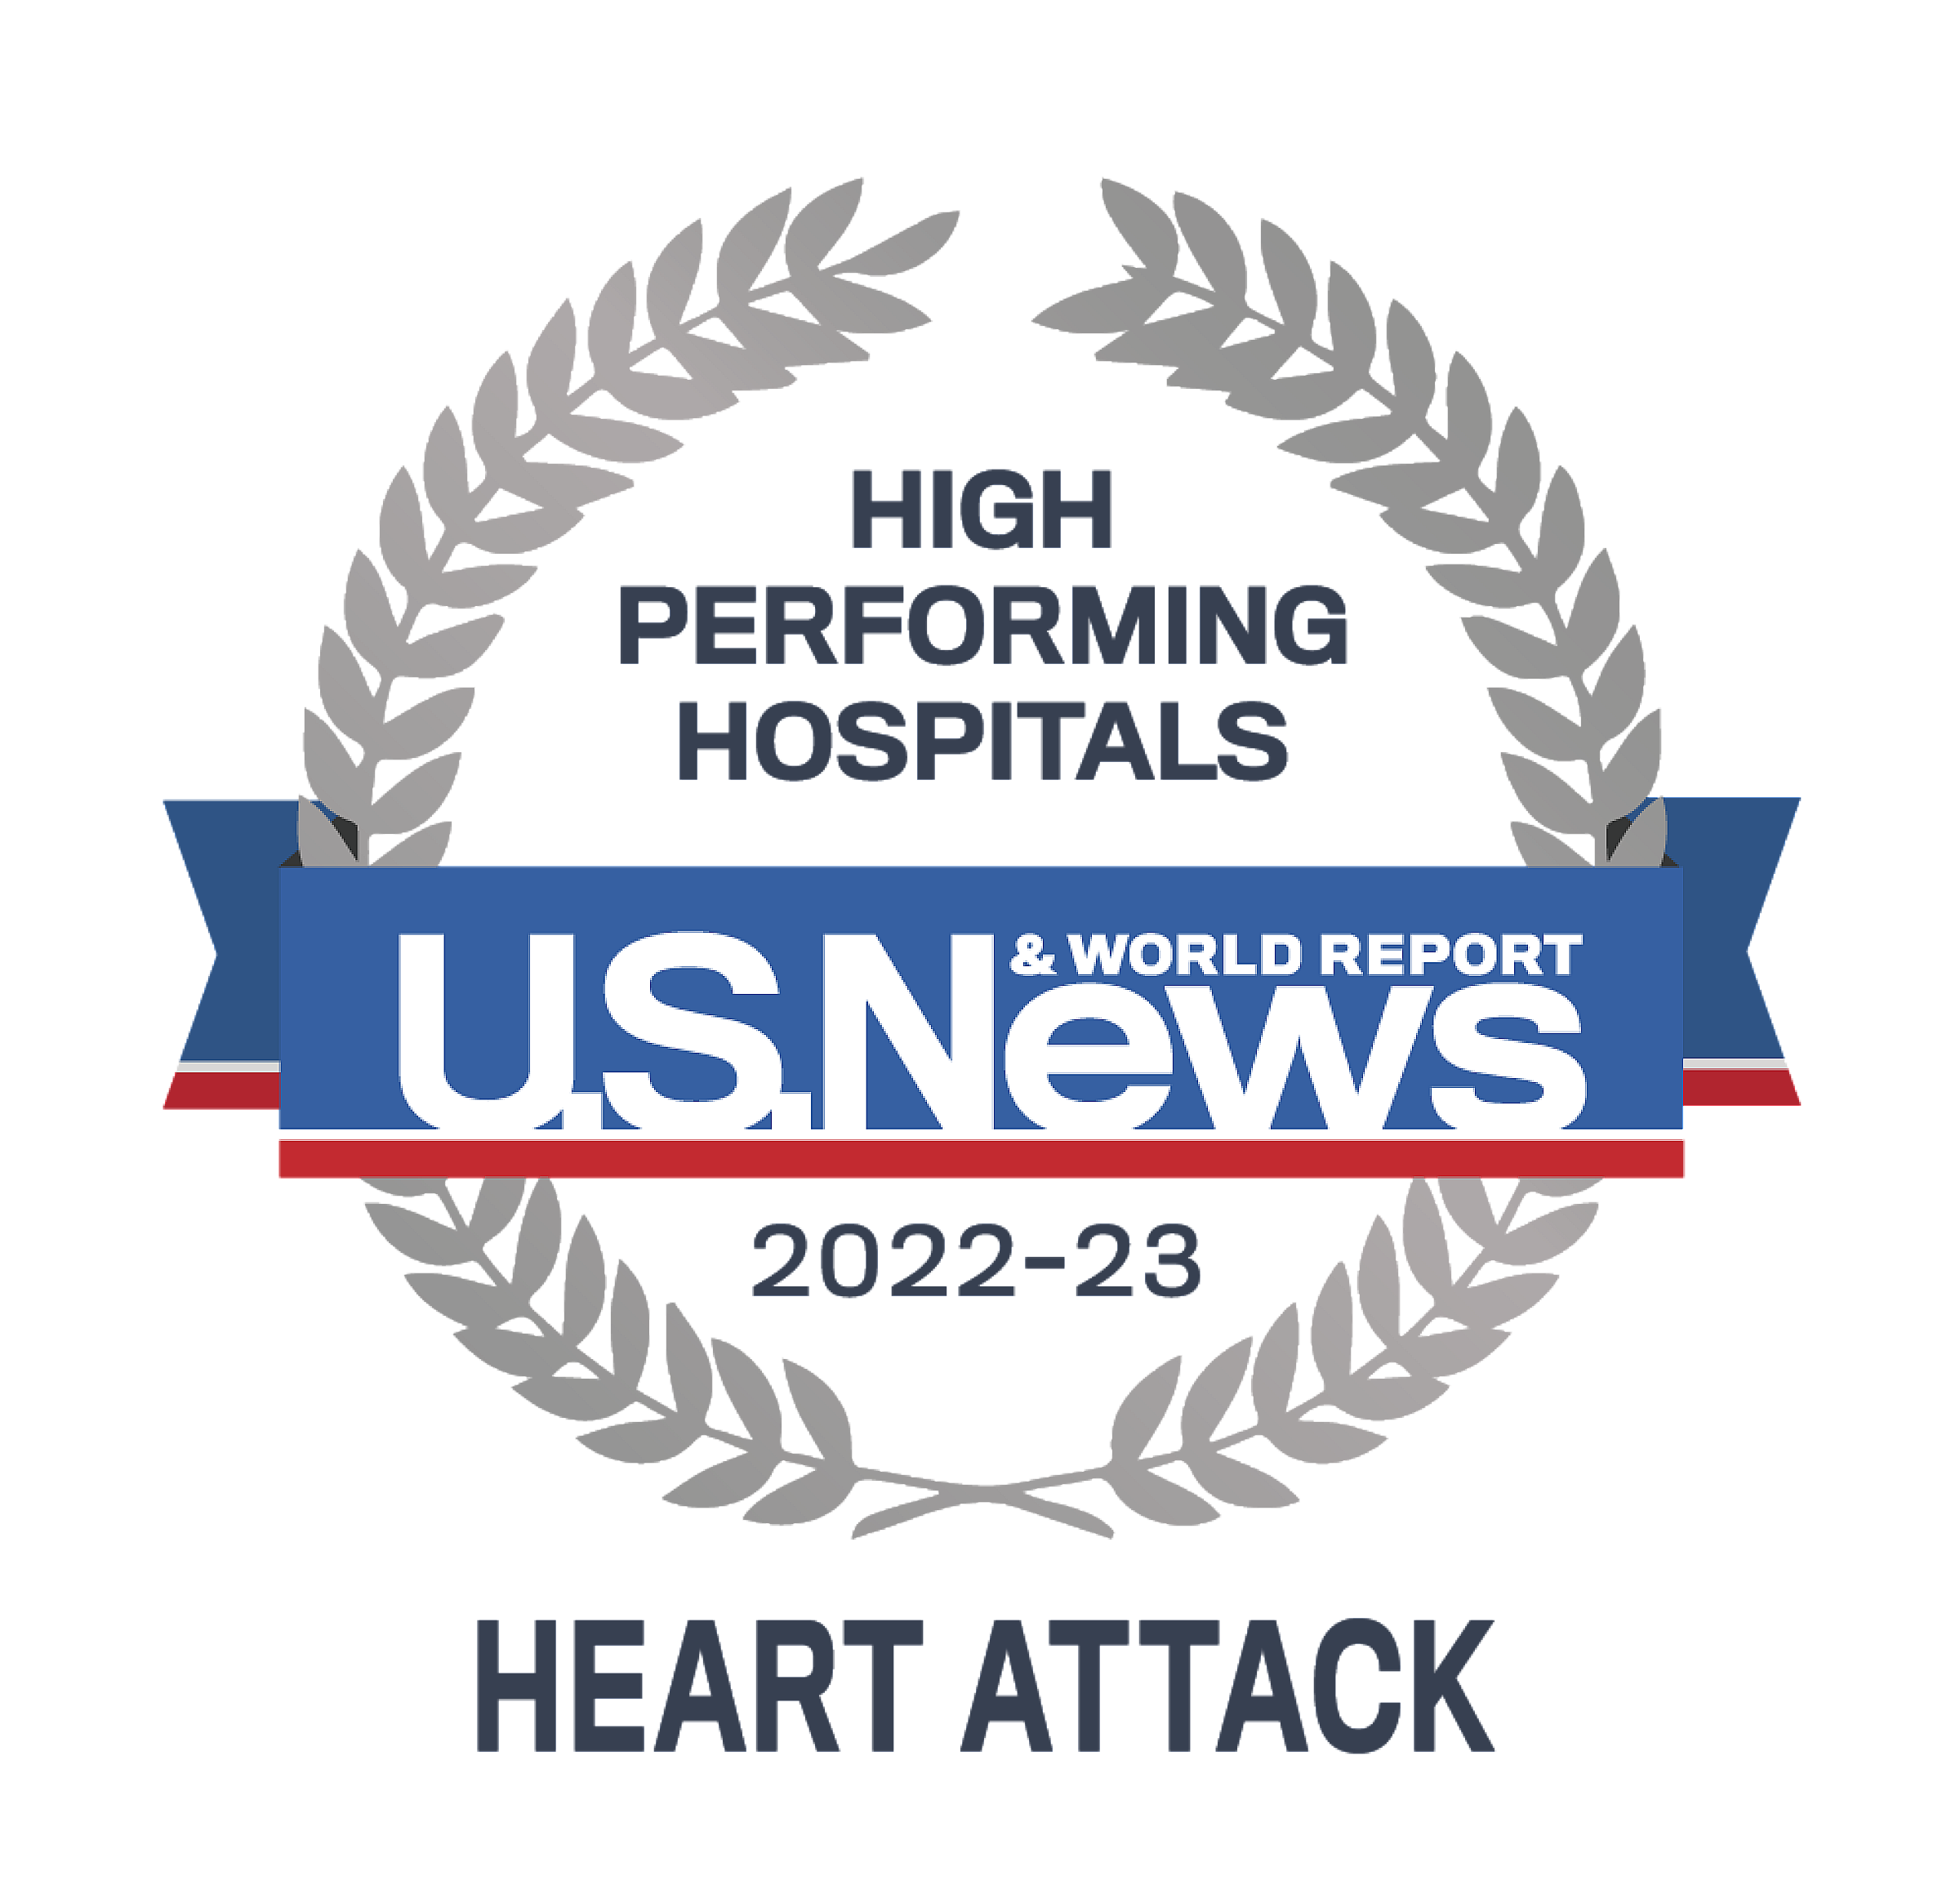 High performing treatment for heart attack treatment badge from US News & World Report 2022-2023